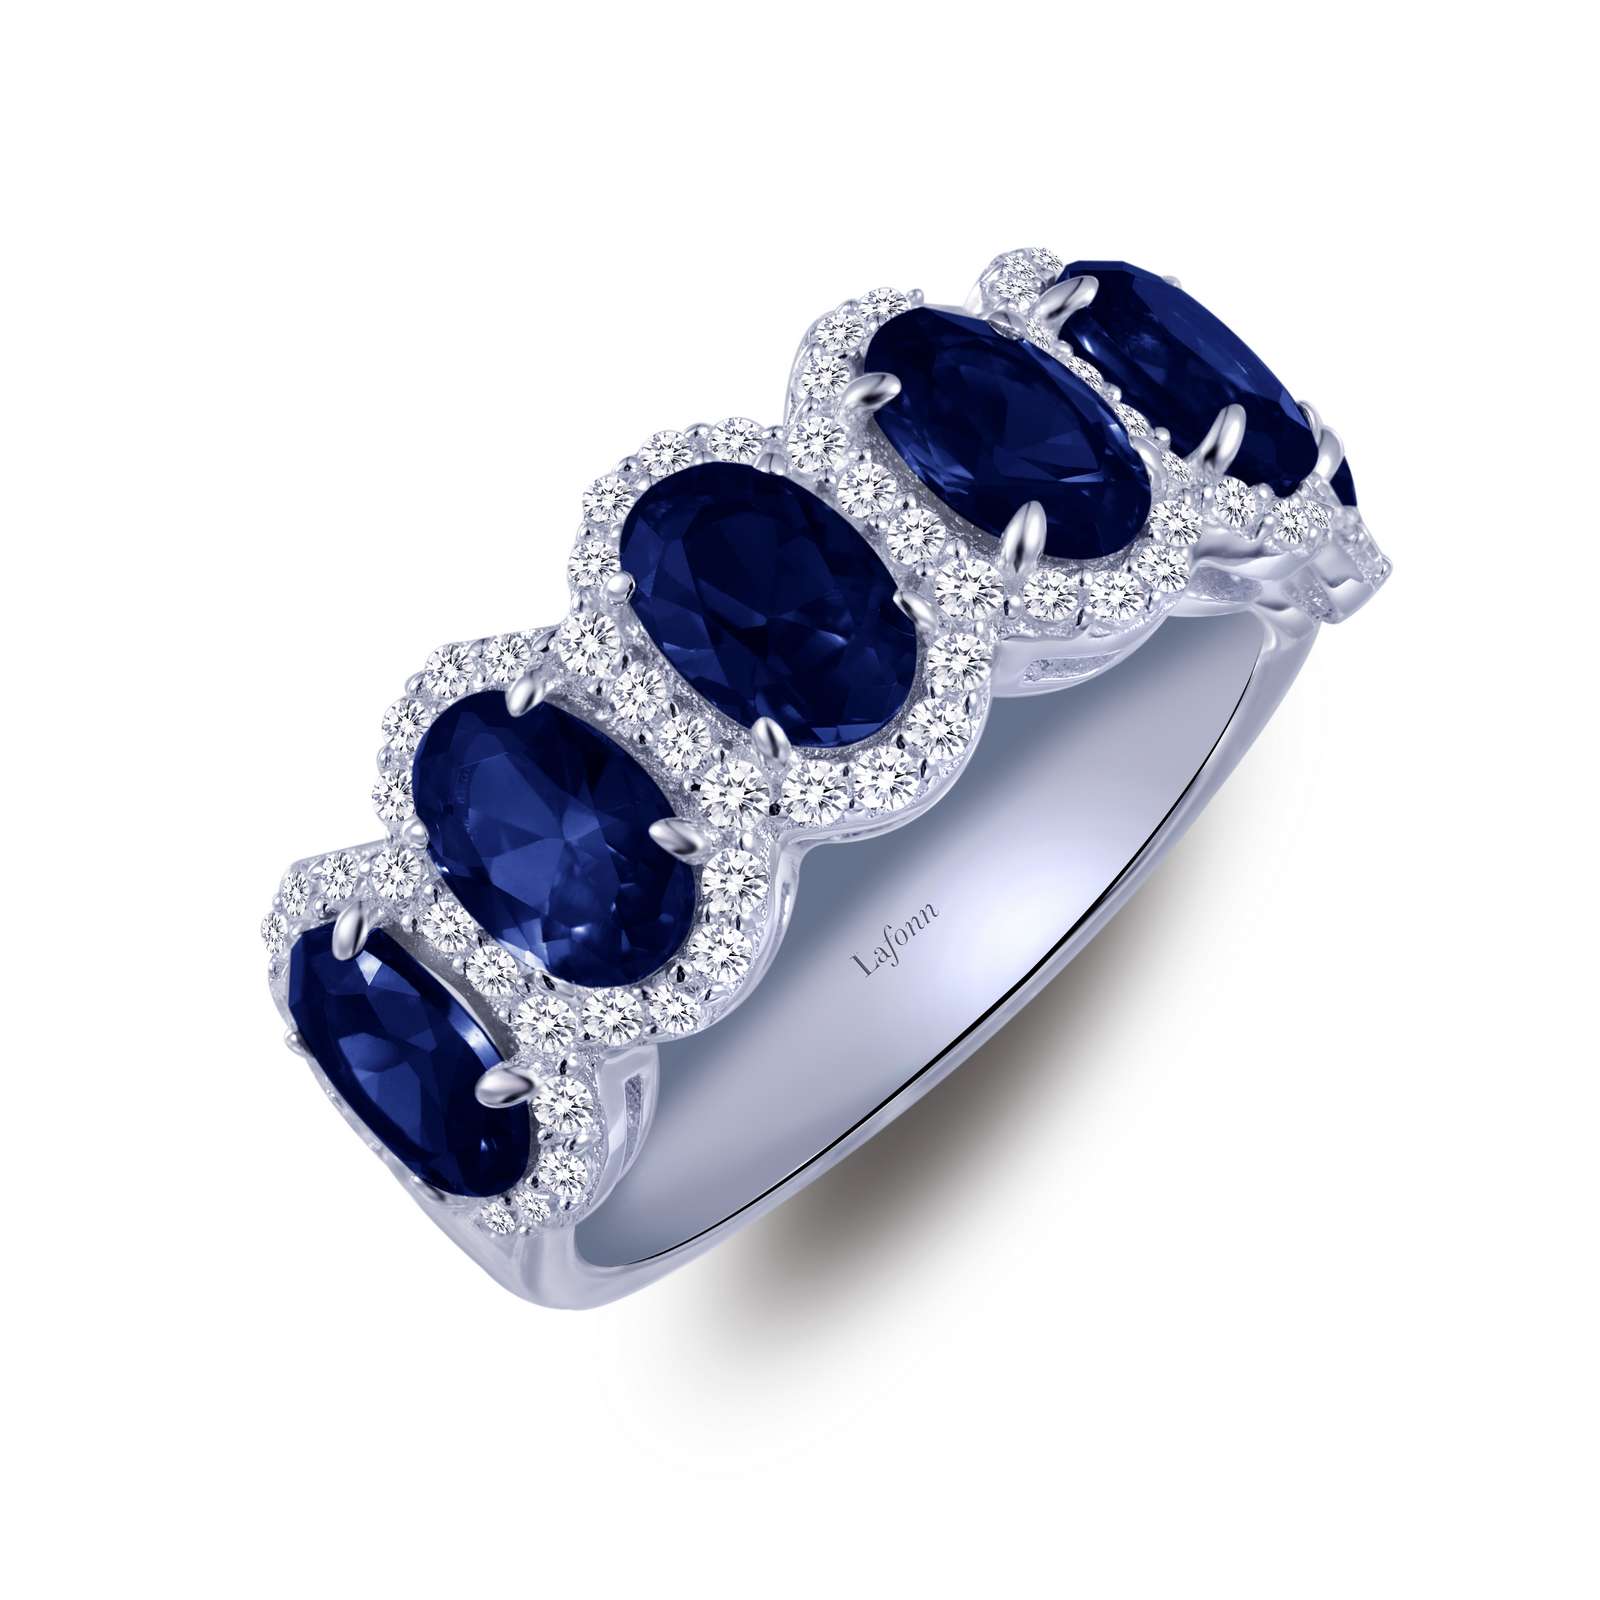 Halo Anniversary Eternity Band Griner Jewelry Co. Moultrie, GA